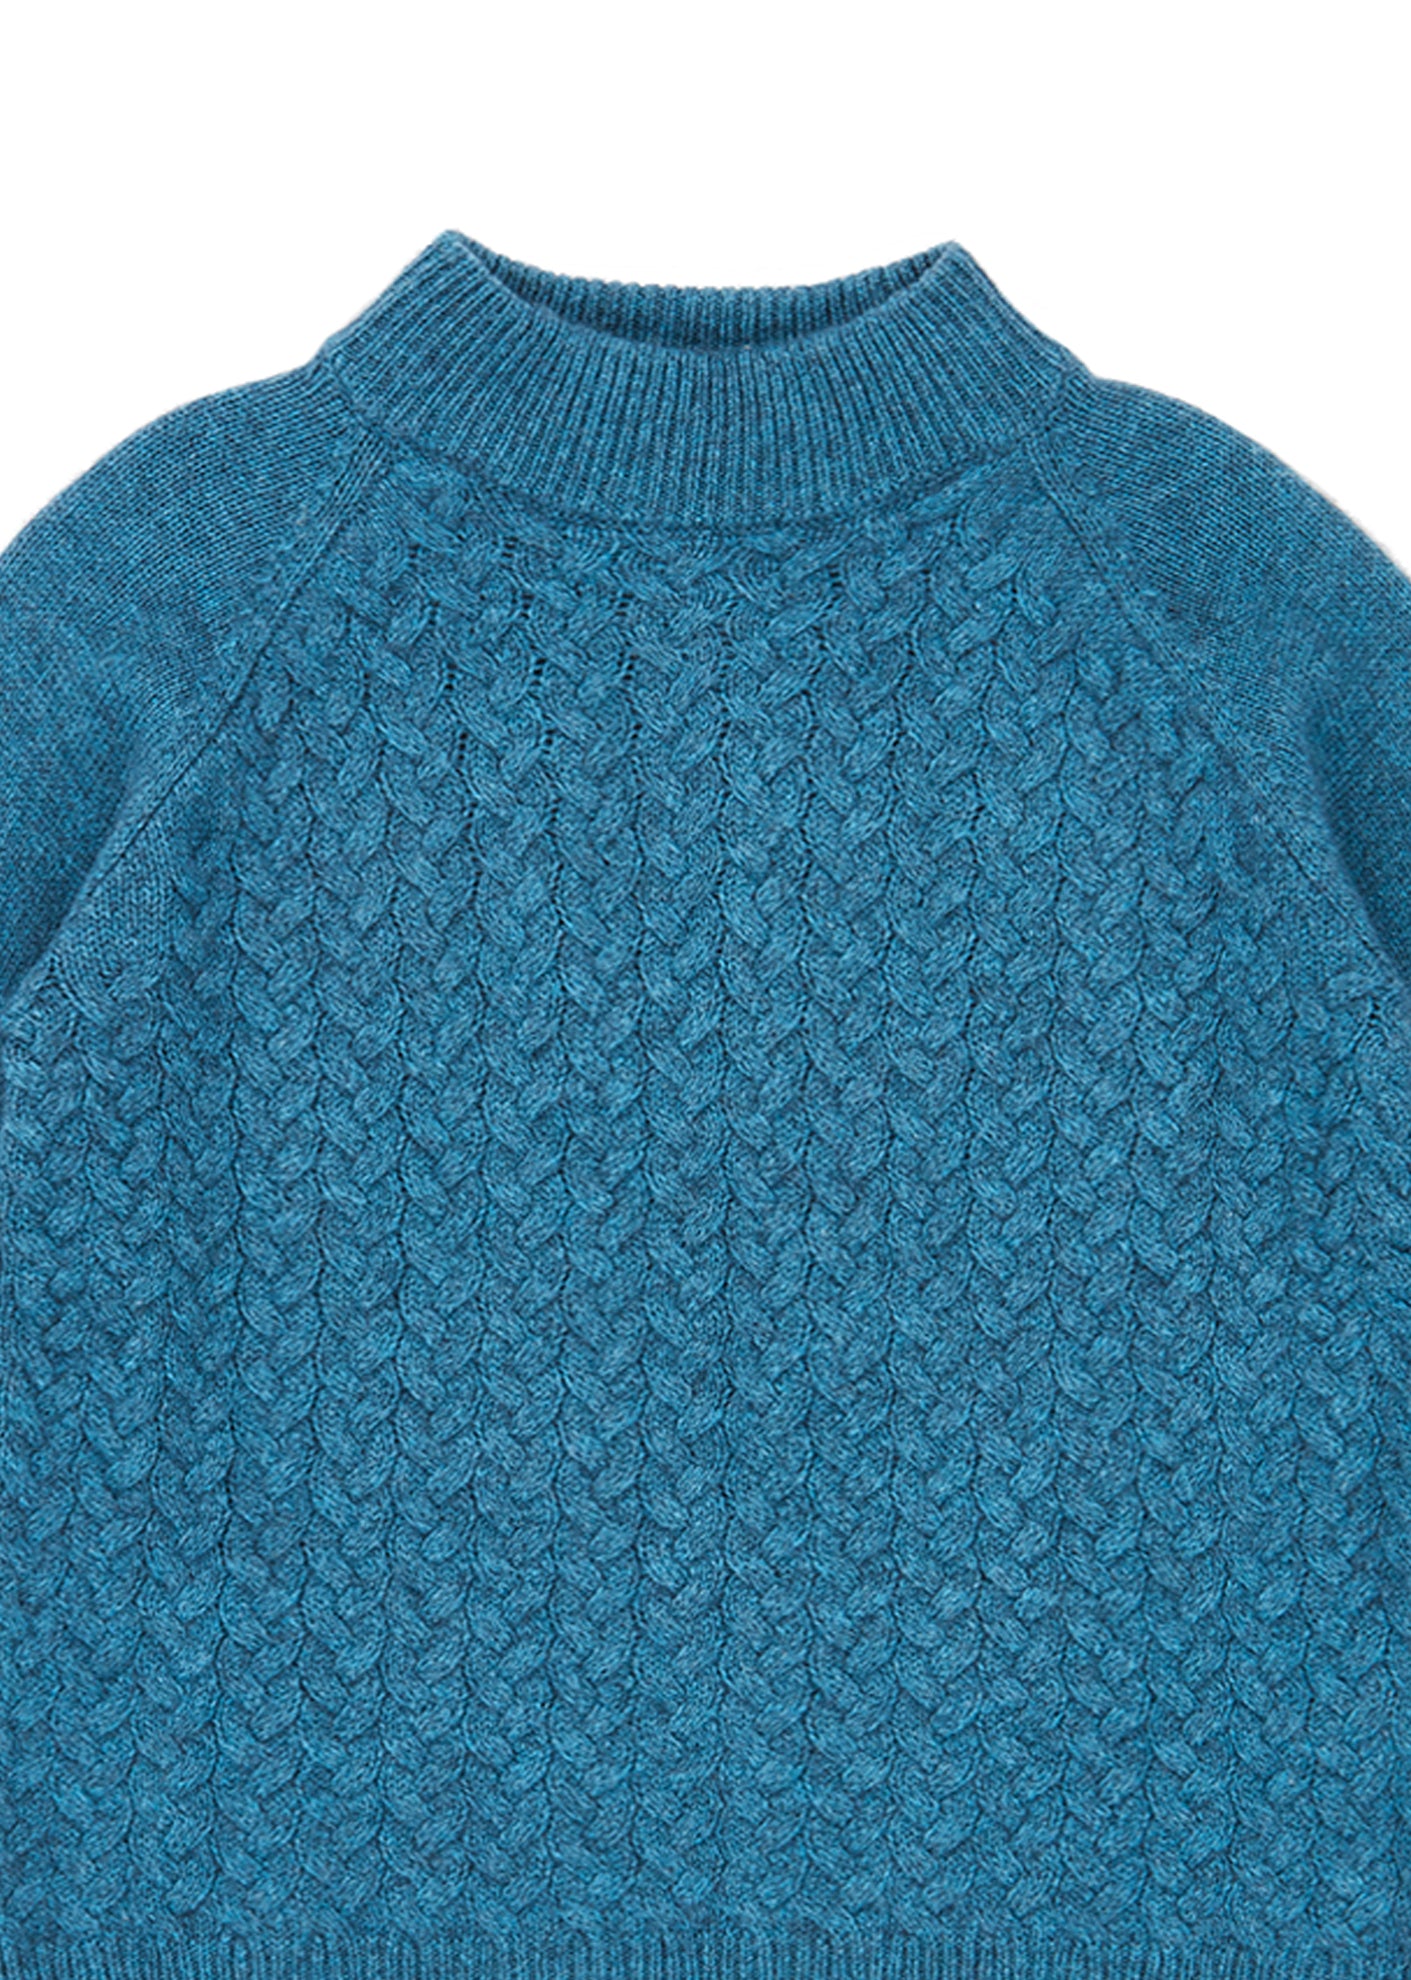 Boys & Girls Teal Owl Cable Jumper